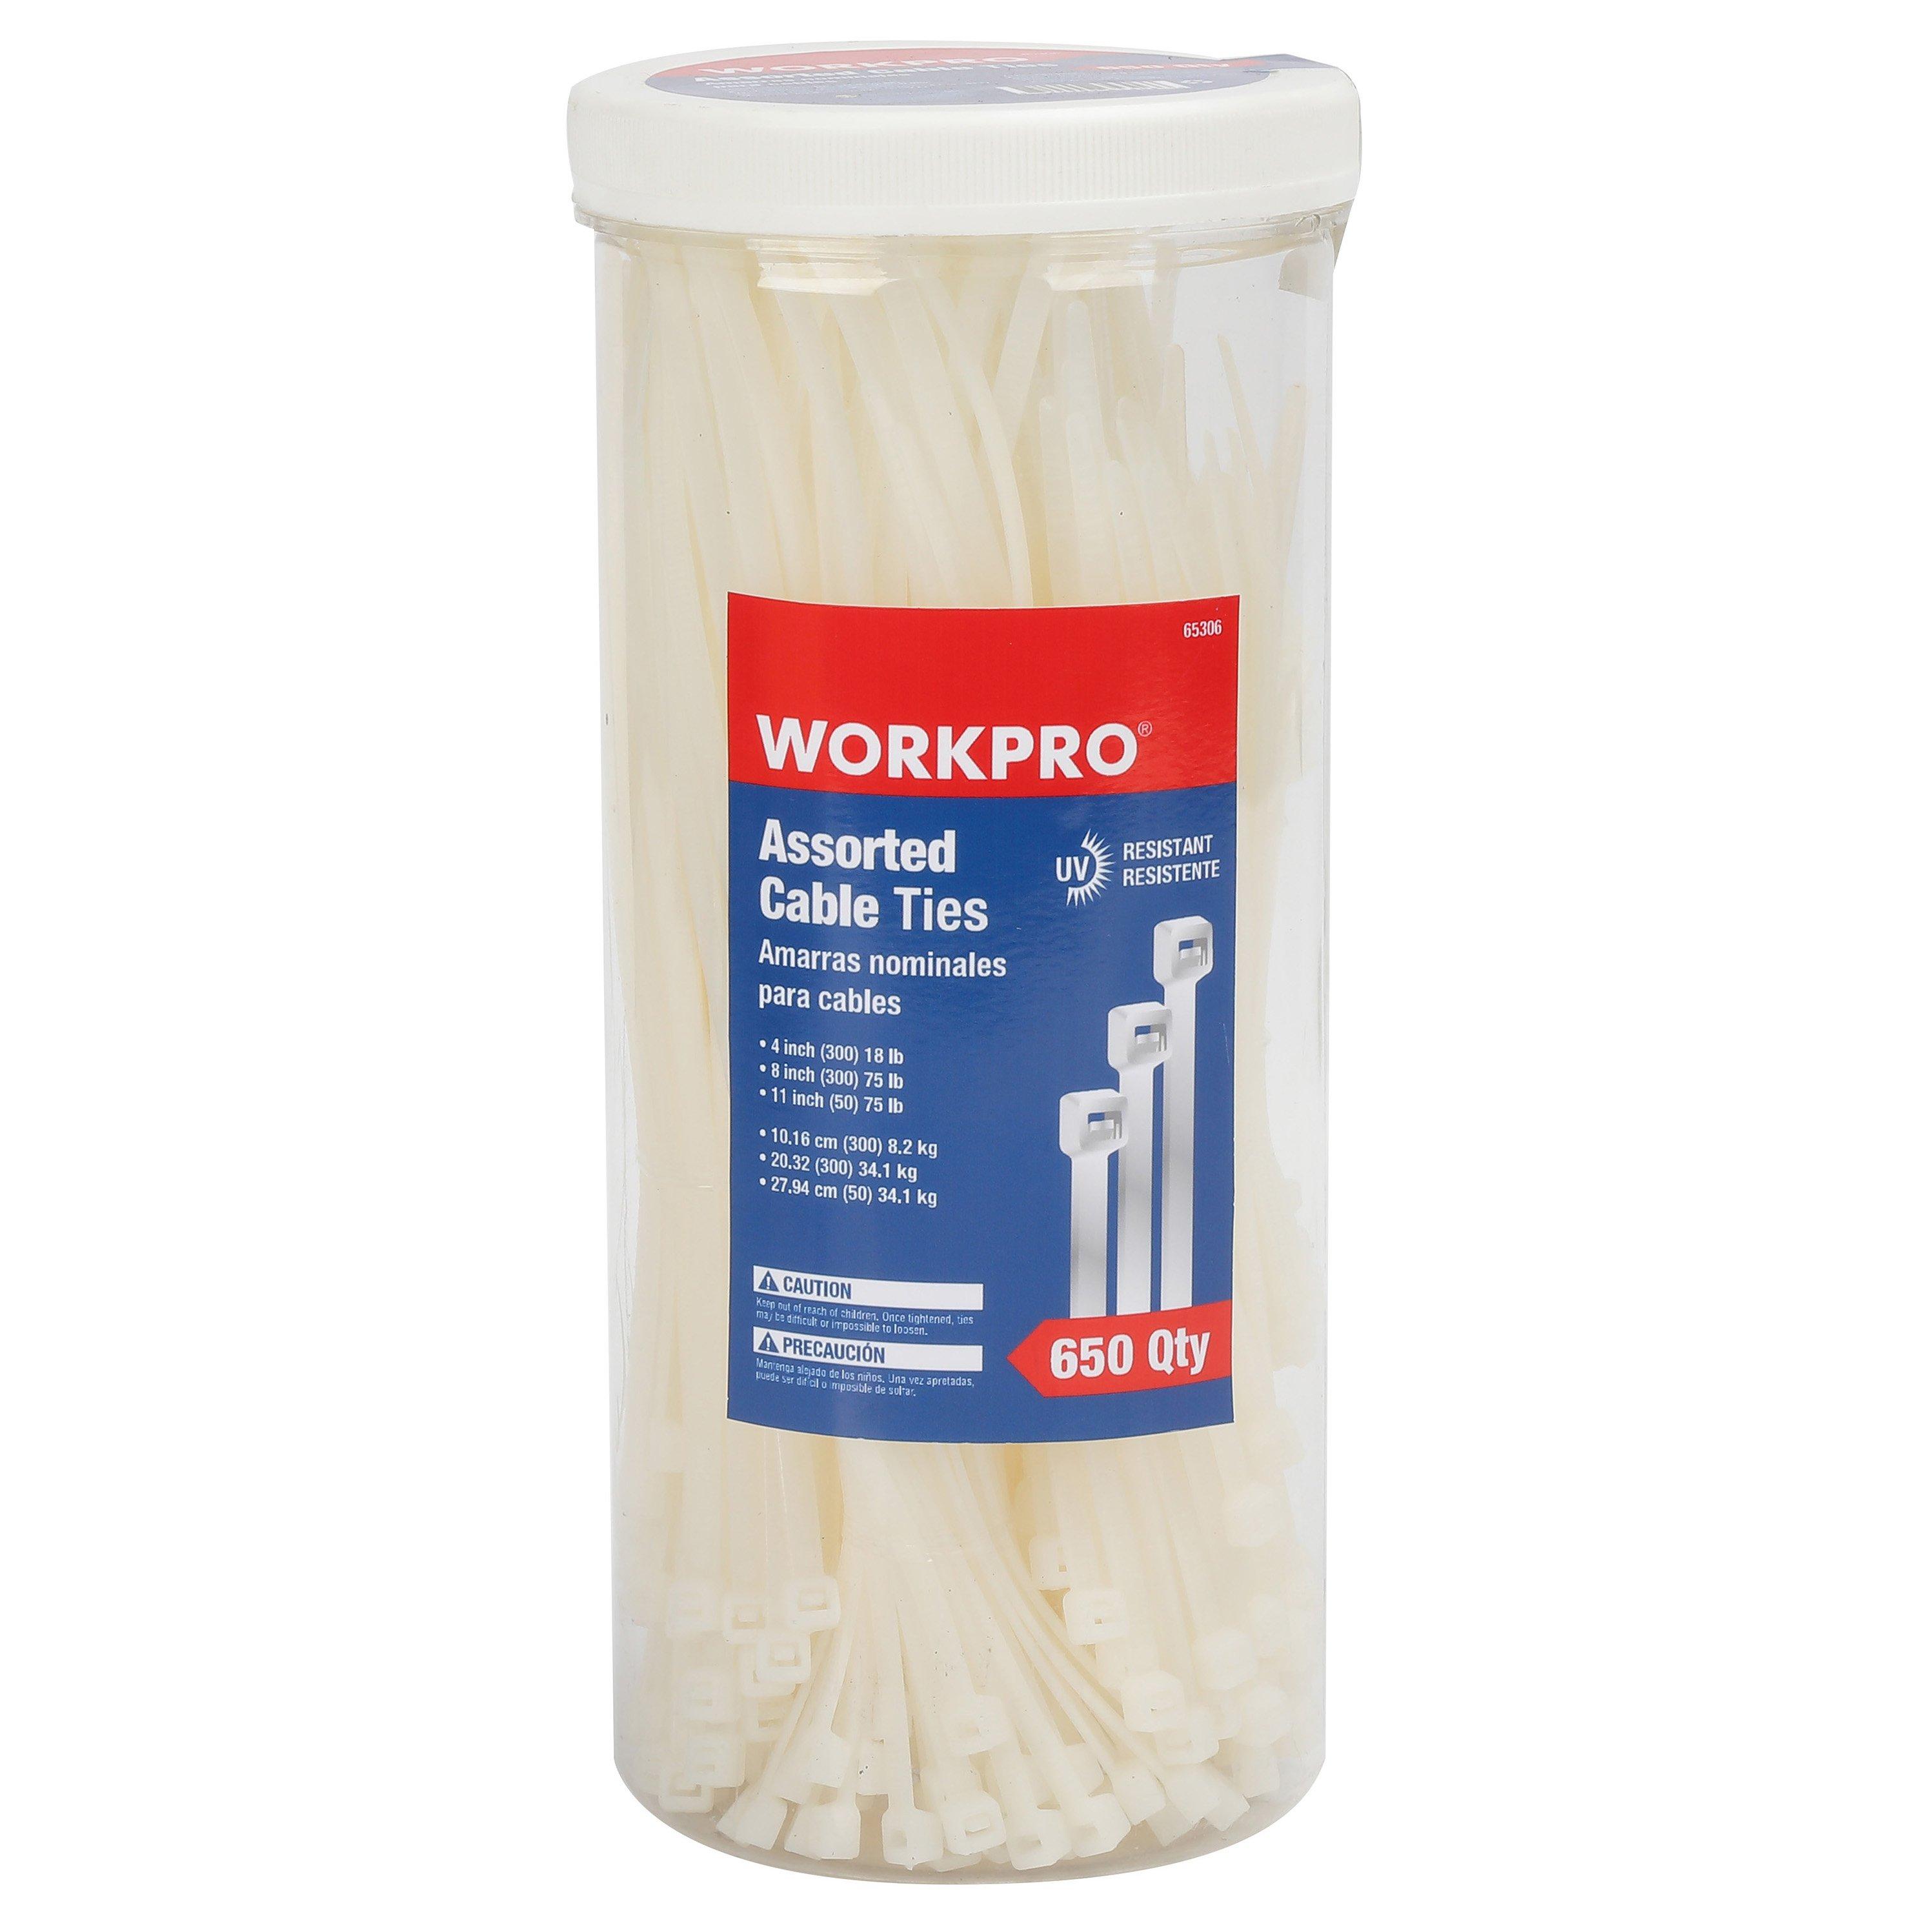 Work Pro Assorted Cable Ties